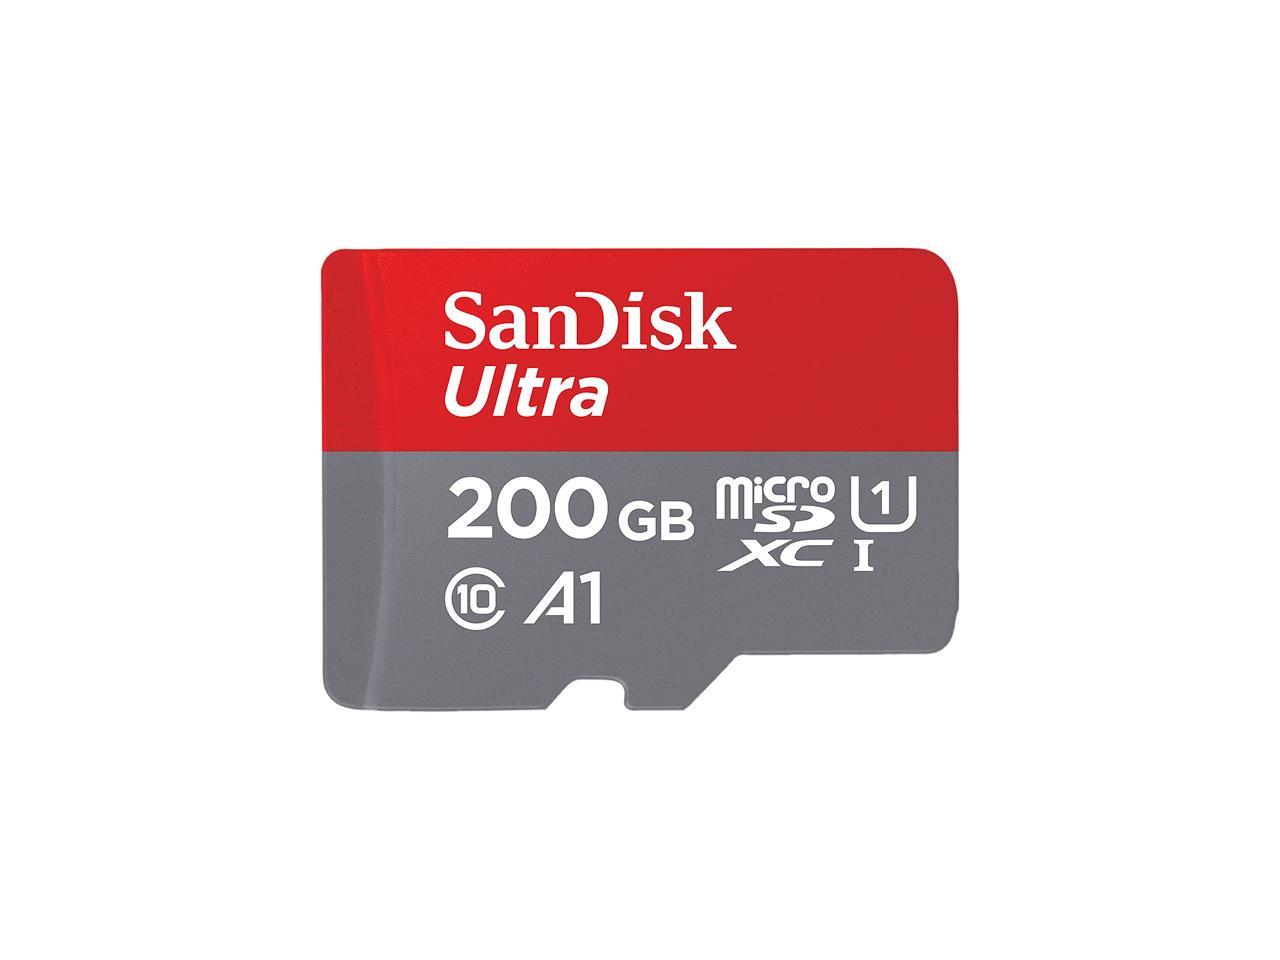 SanDisk Ultra 200GB MicroSDXC Verified for Micromax E485 by SanFlash 100MBs A1 U1 C10 Works with SanDisk 